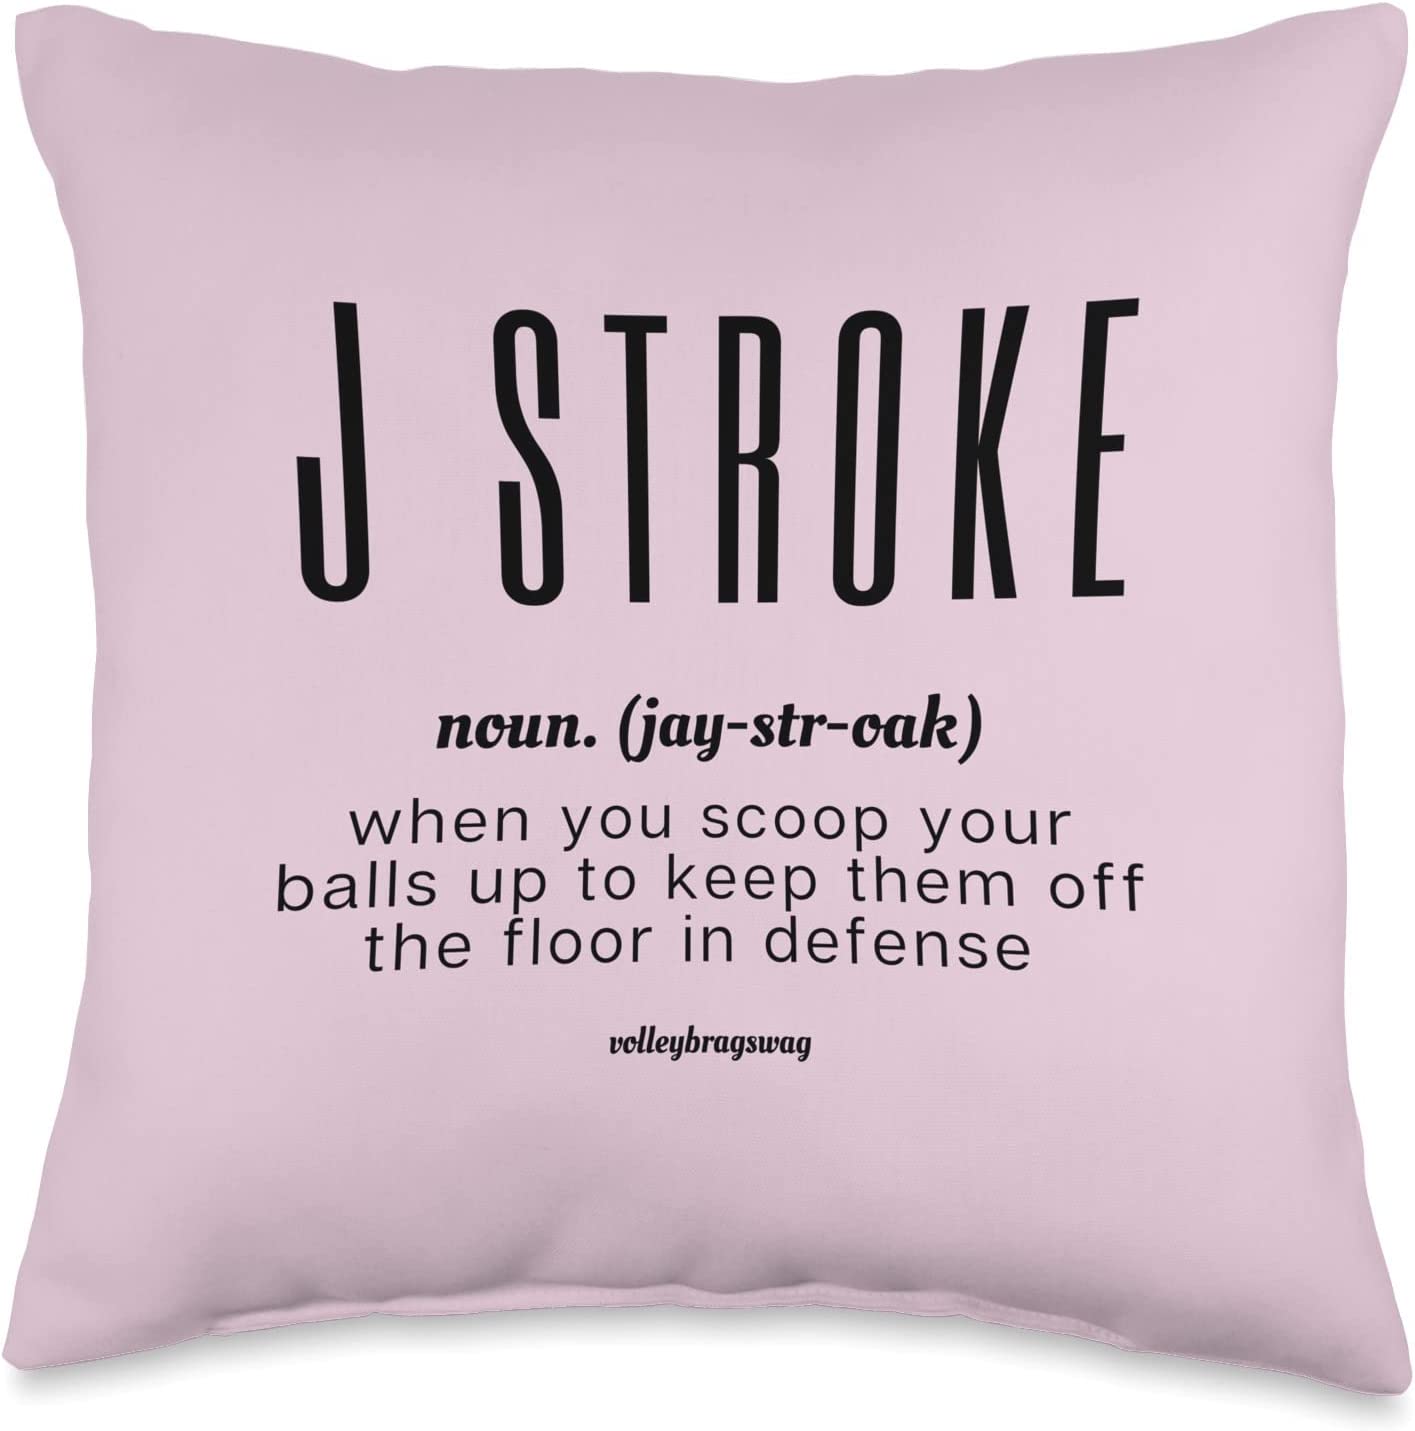 Funny Volleyball T-Shirts and Pillows Feature Dig Volleyball Quotes Like J Stroke: When You Scoop Your Balls In Defense To Keep Them off The Floor